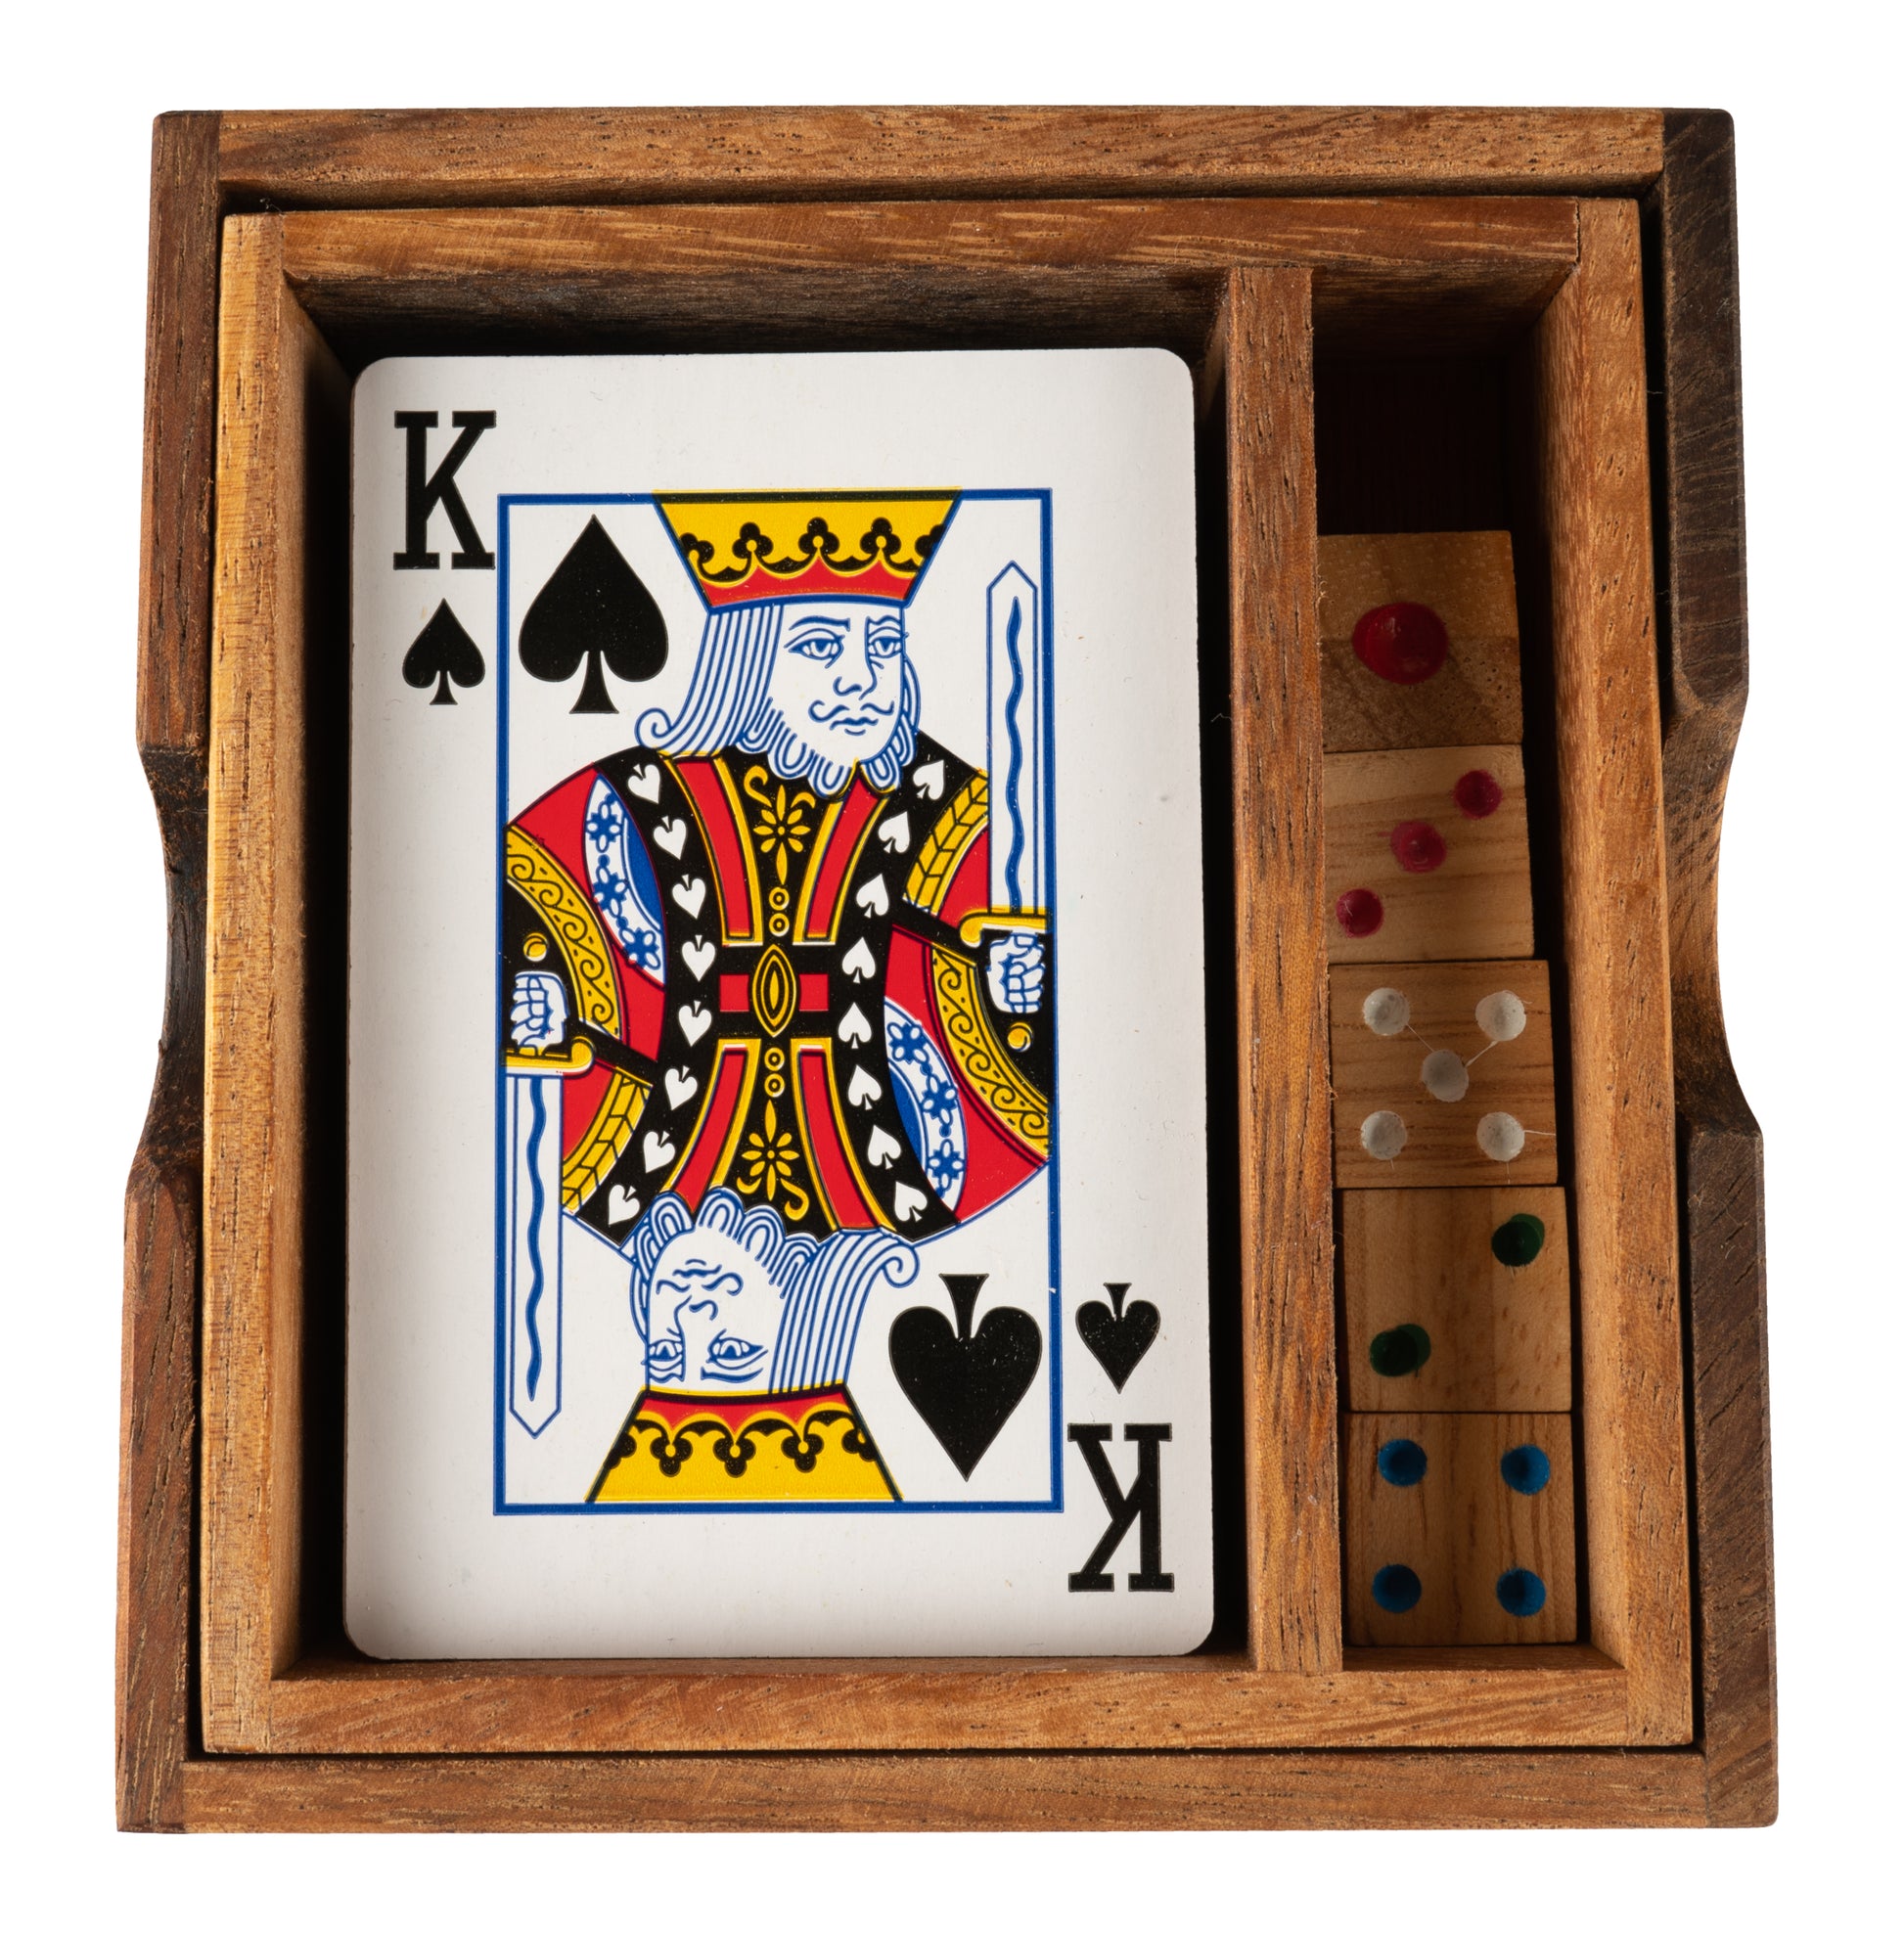 Card Blackjack Sets With 5 Dice And Wooden Package - CCCollections